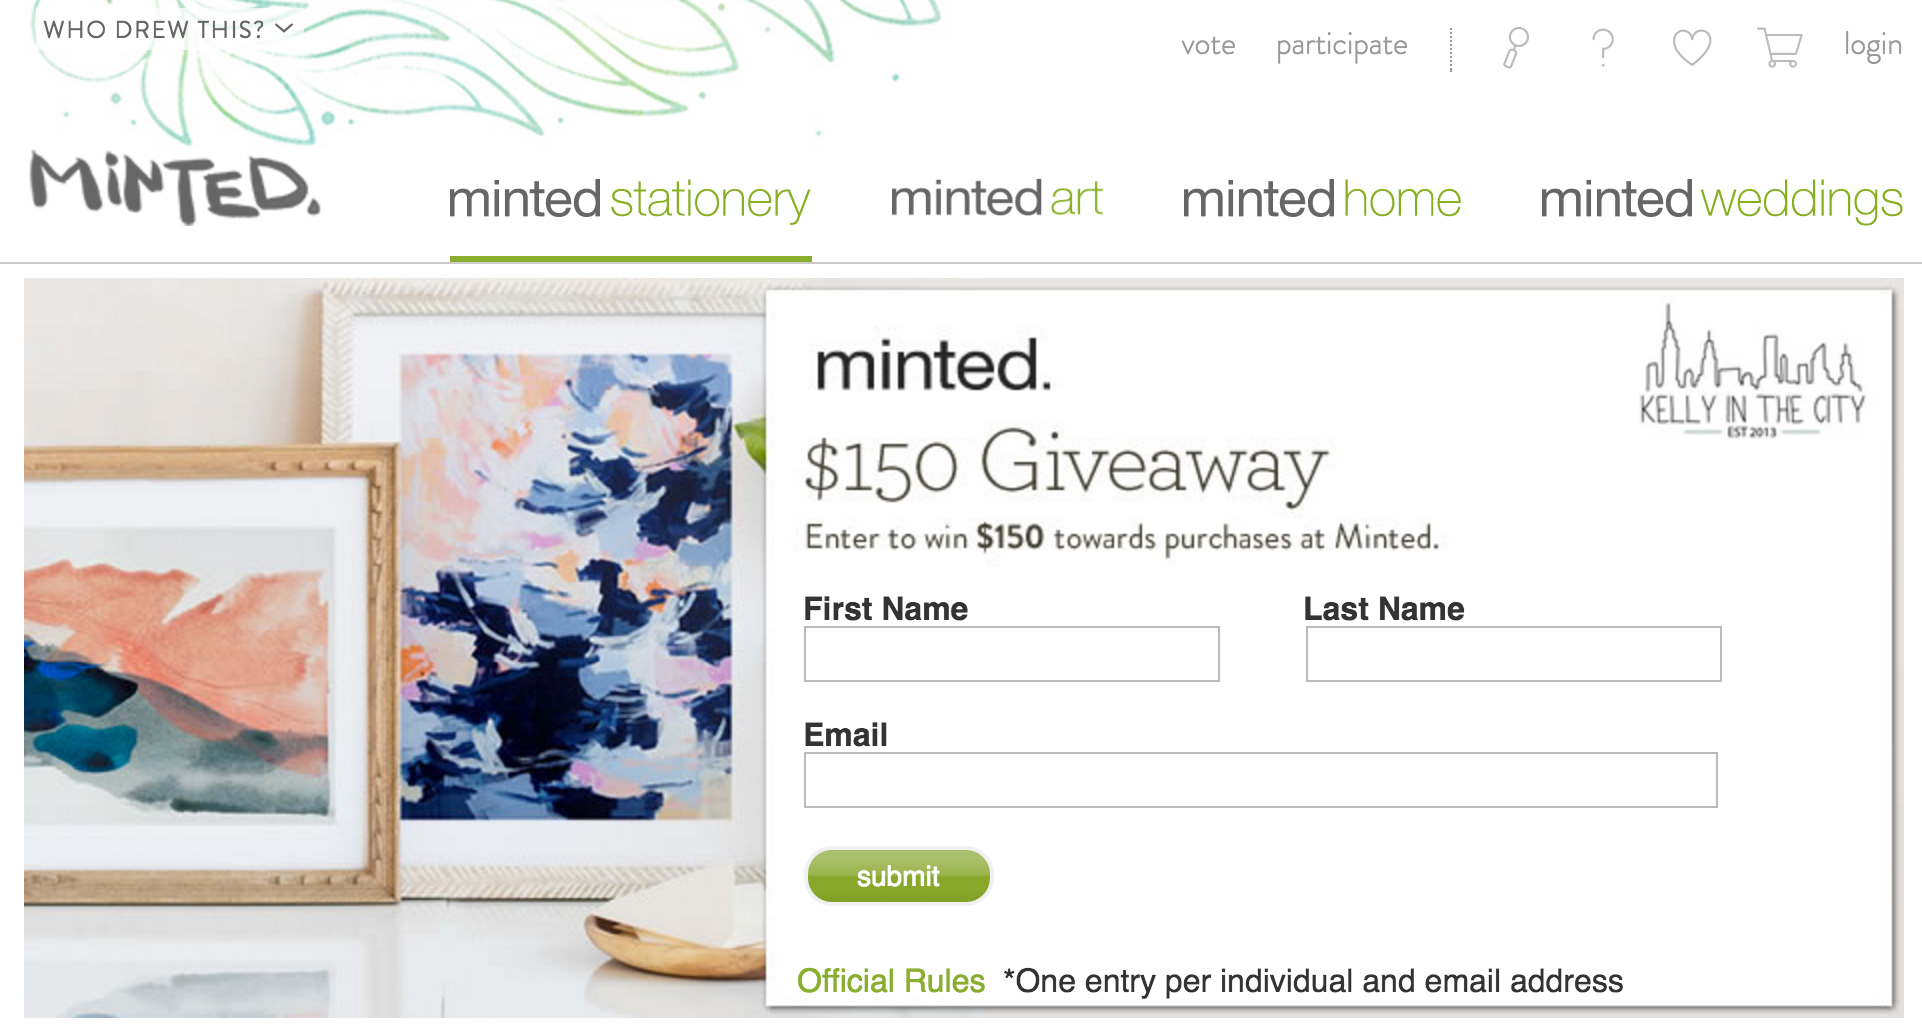 minted giveaway Kelly in the city